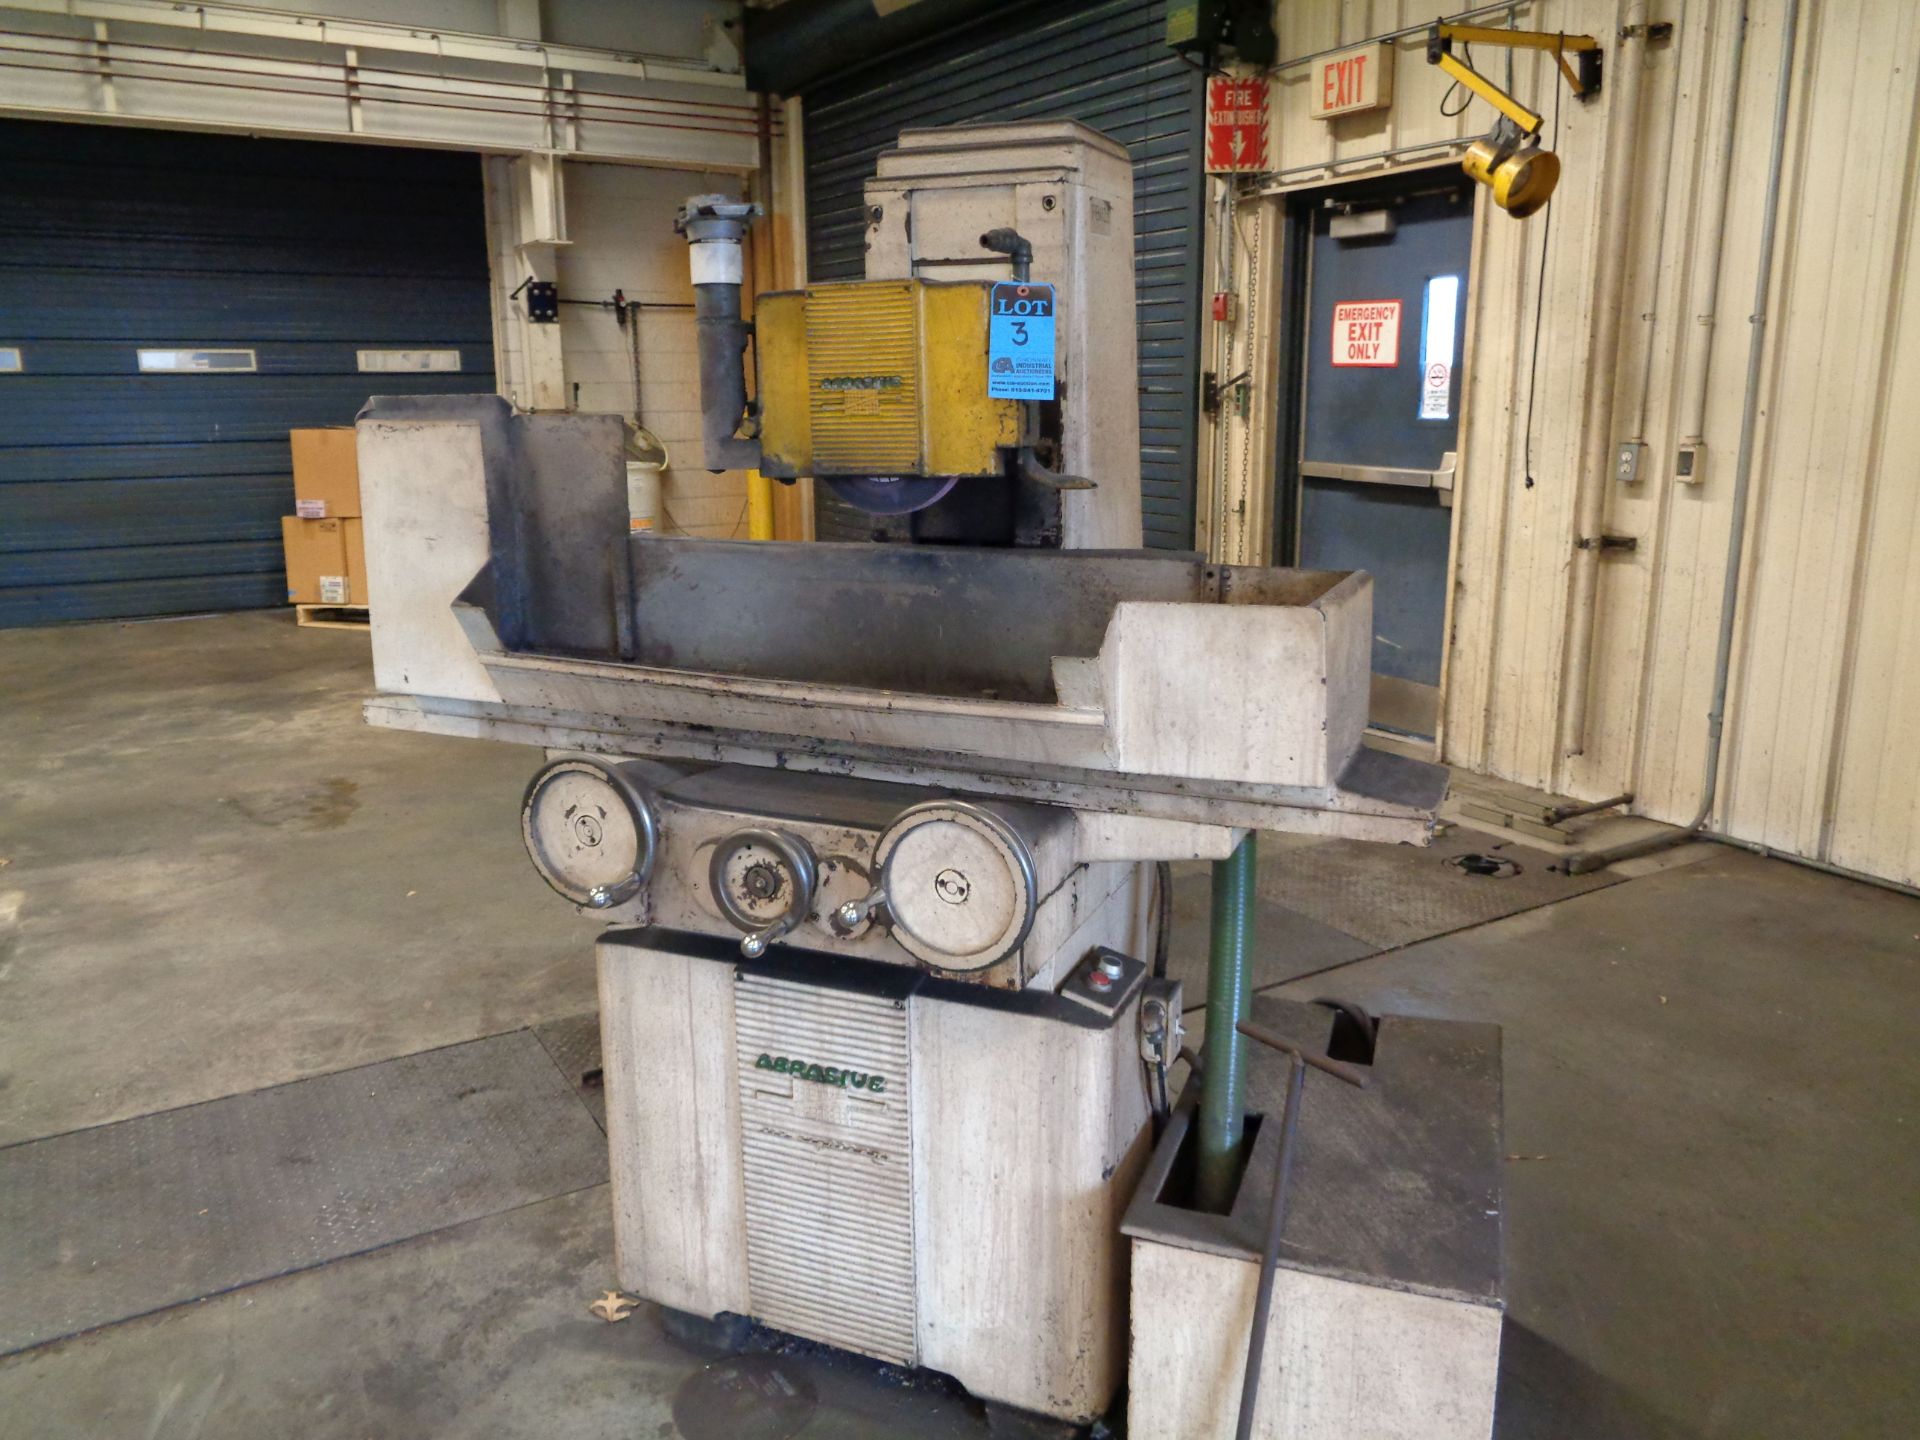 ABRASIVE SIX EIGHTEEN HAND FEED SURFACE GRINDER; S/N N/A **SPECIAL NOTICE: NEEDS MAGNETIC CHUCK**